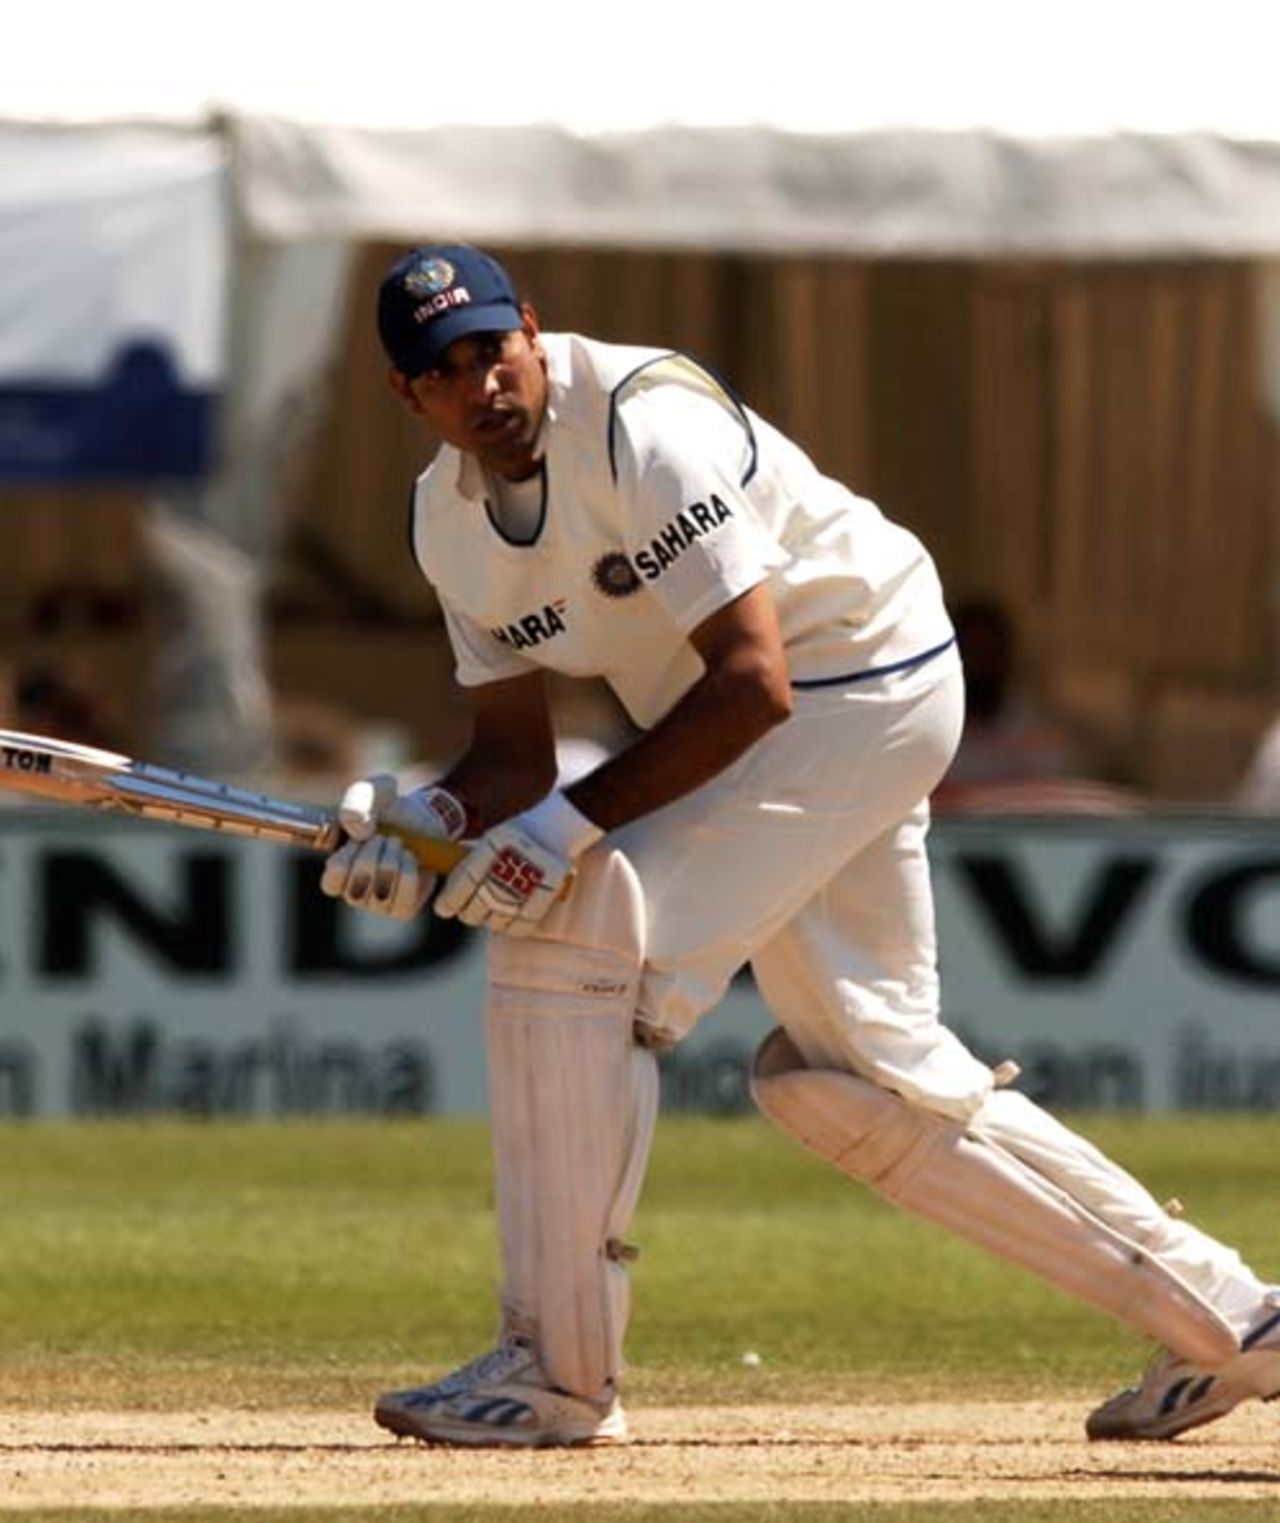 VVS Laxman flicks one  during his innings of 95, Sussex v Indians, Hove, Tour game, 2nd day, July 8, 2007